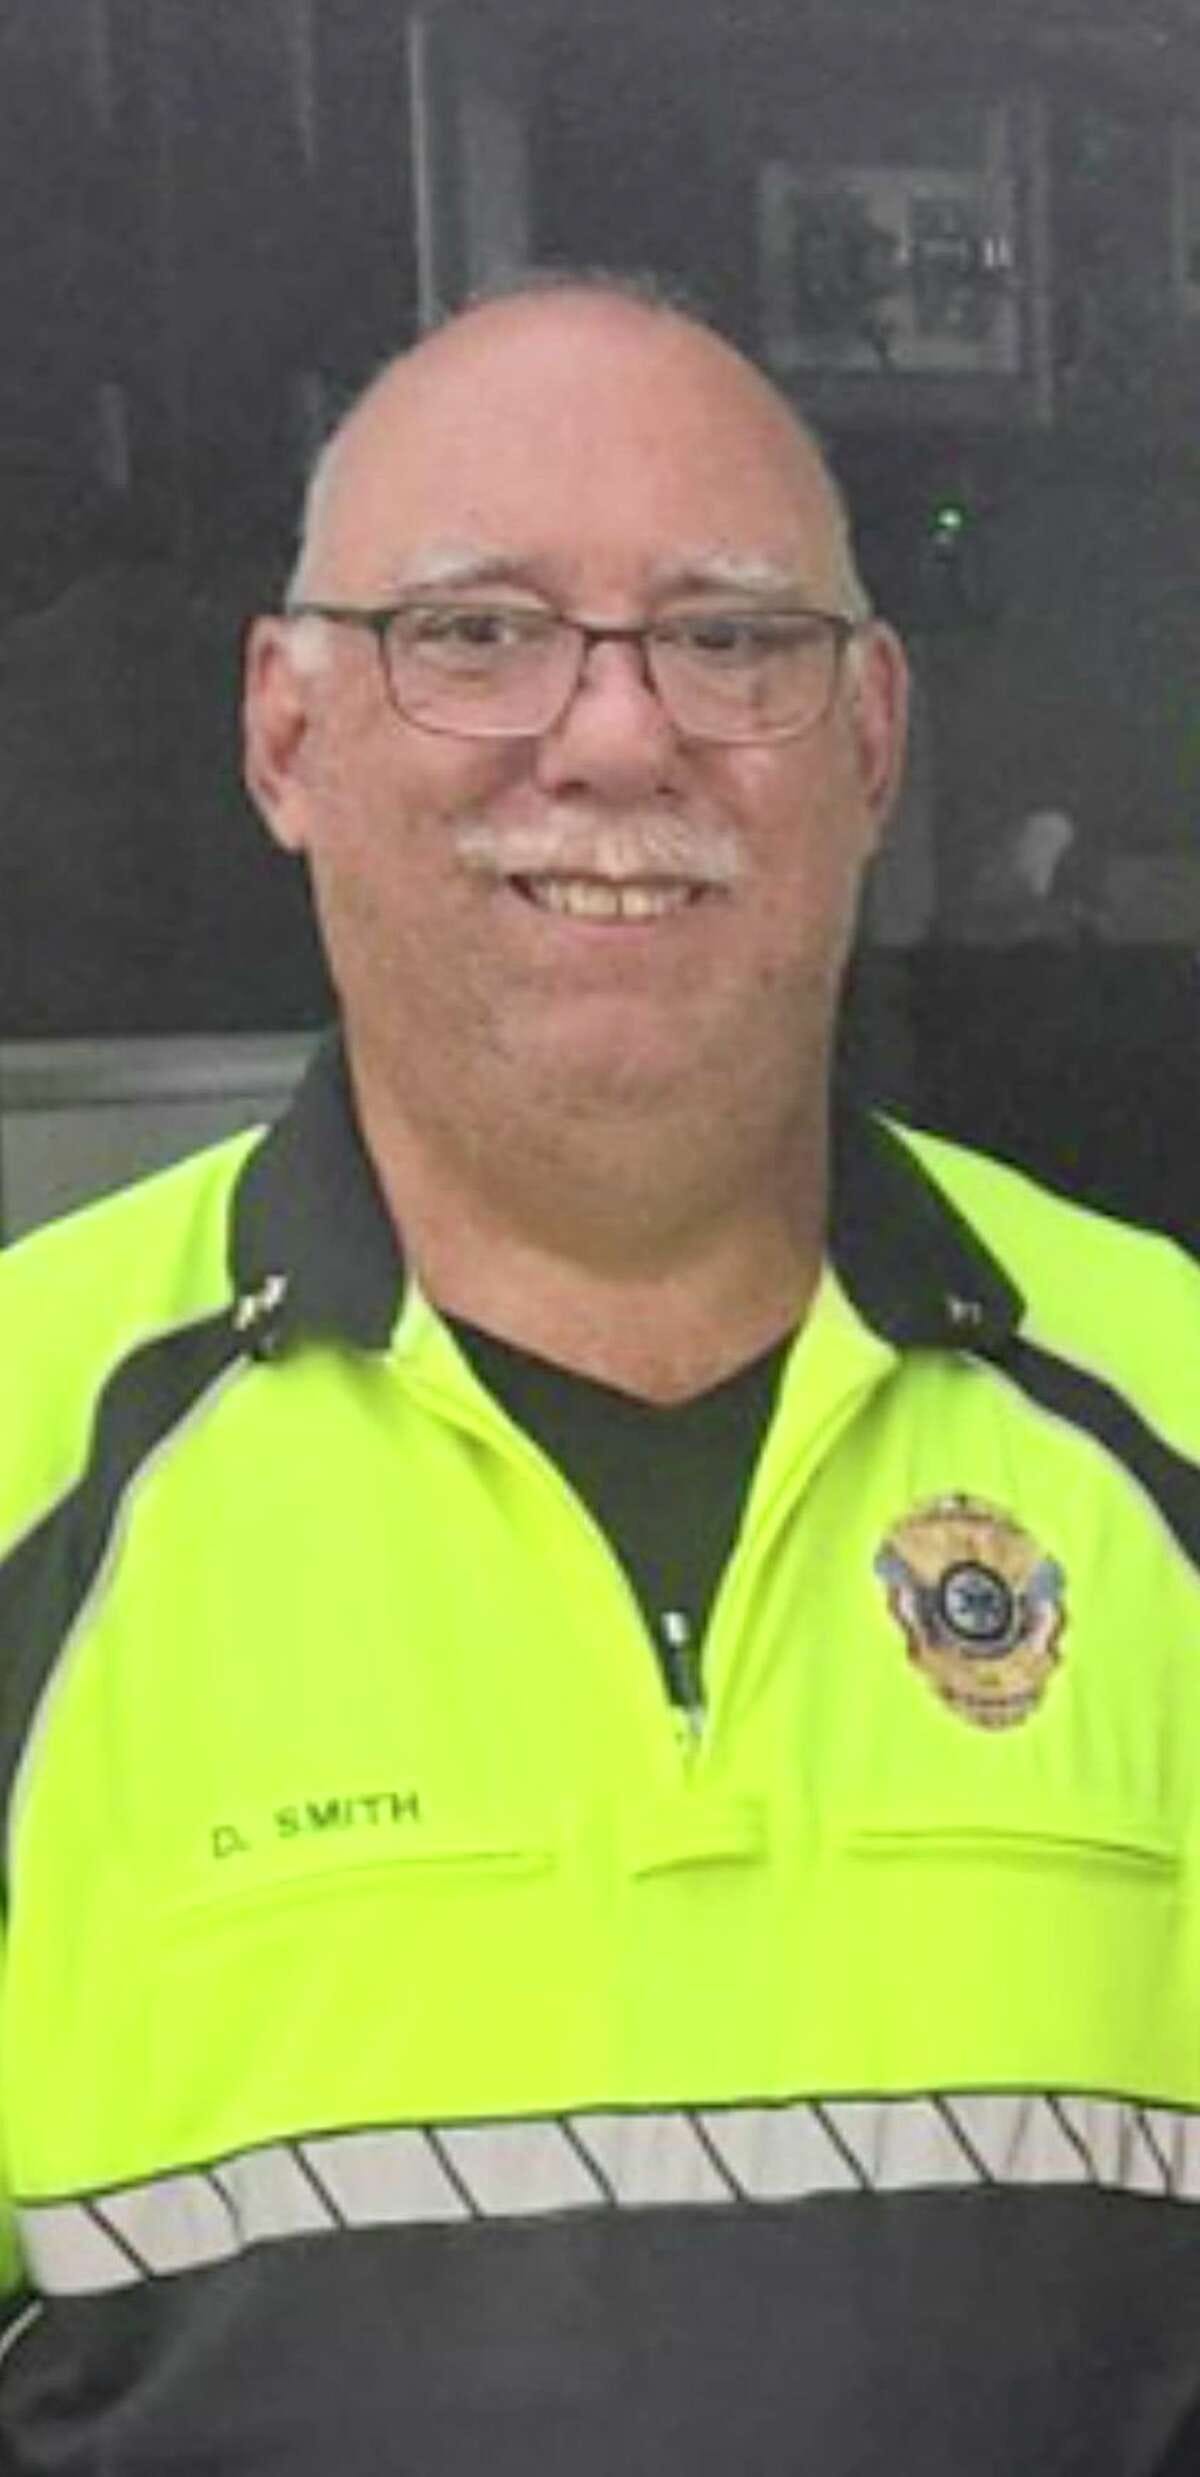 Don Smith, Monroe EMS leader and former Fairfield deputy police chief, died Tuesday of cancer, officials said.